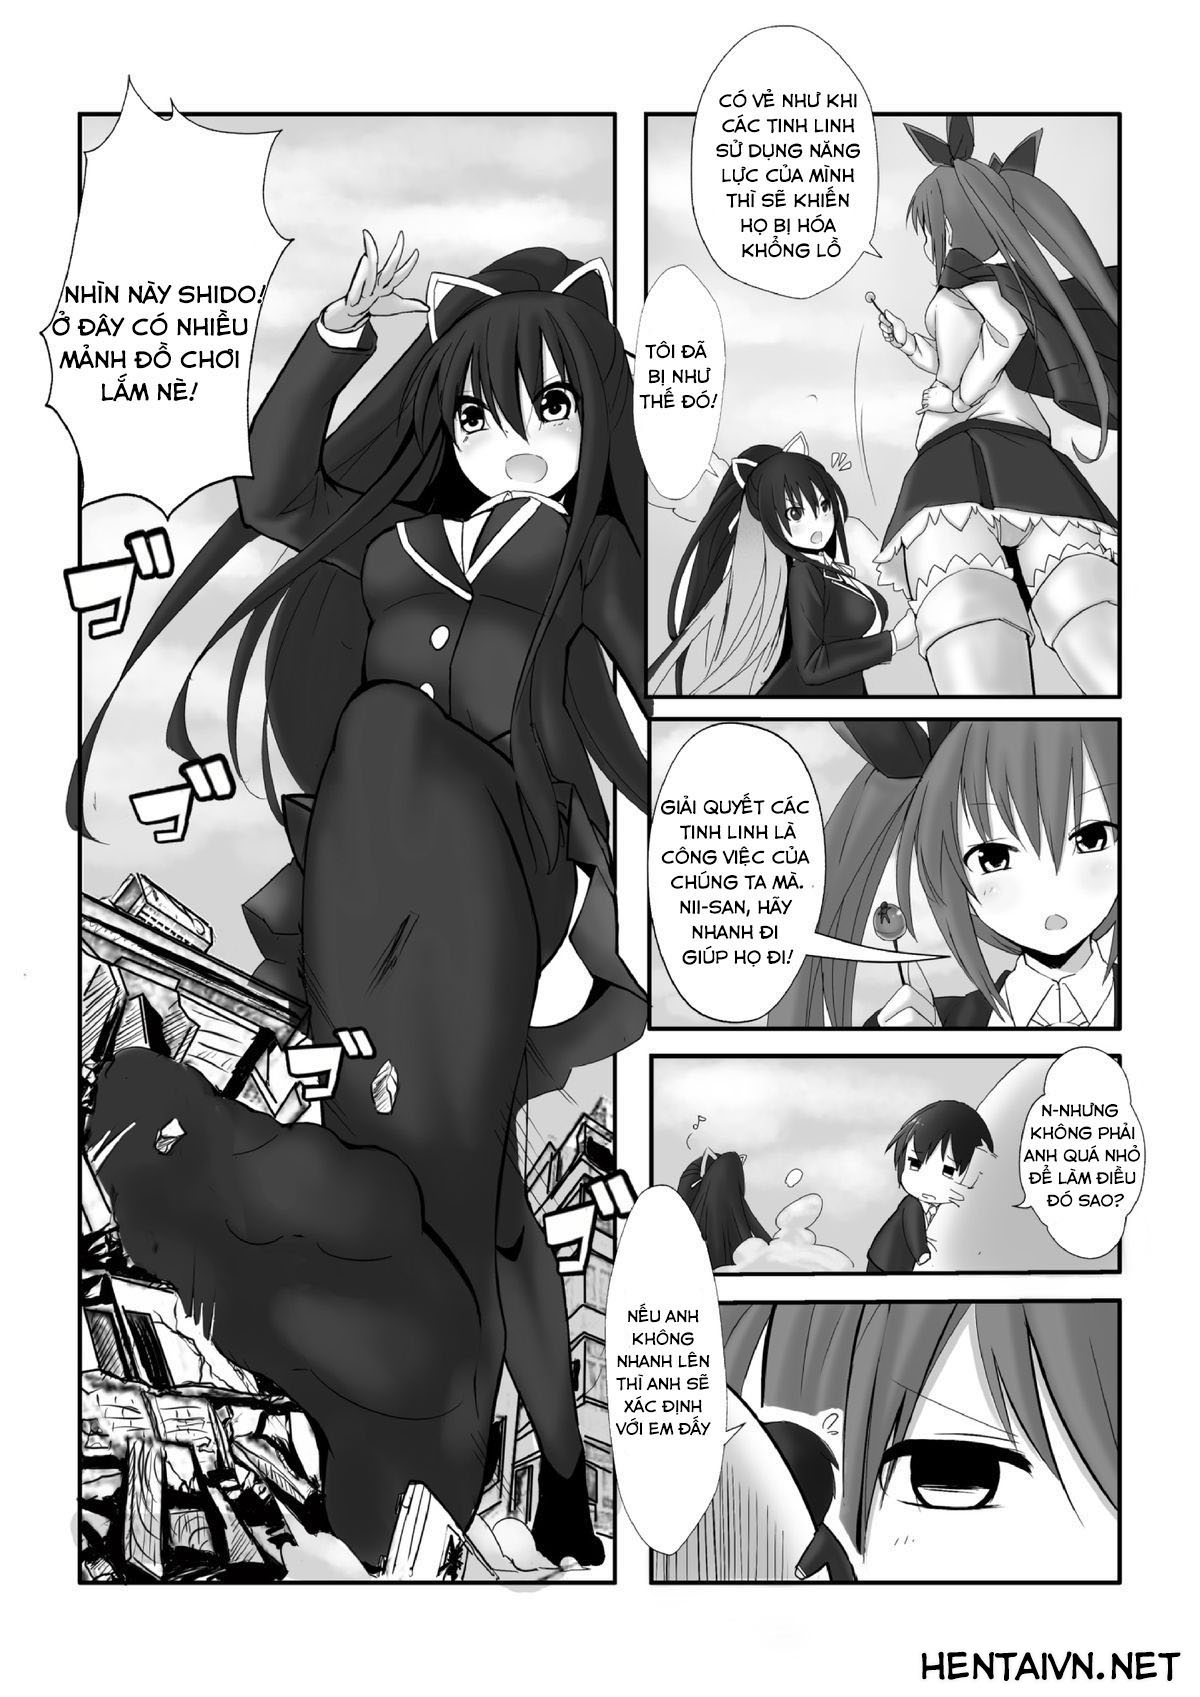 [Kazan no You] Date a Titaness (Date A Live) [Vietnamese Tiếng Việt] [Shinto] [火山の楊] DATE A TITANESS (デート・ア・ライブ) [ベトナム翻訳]